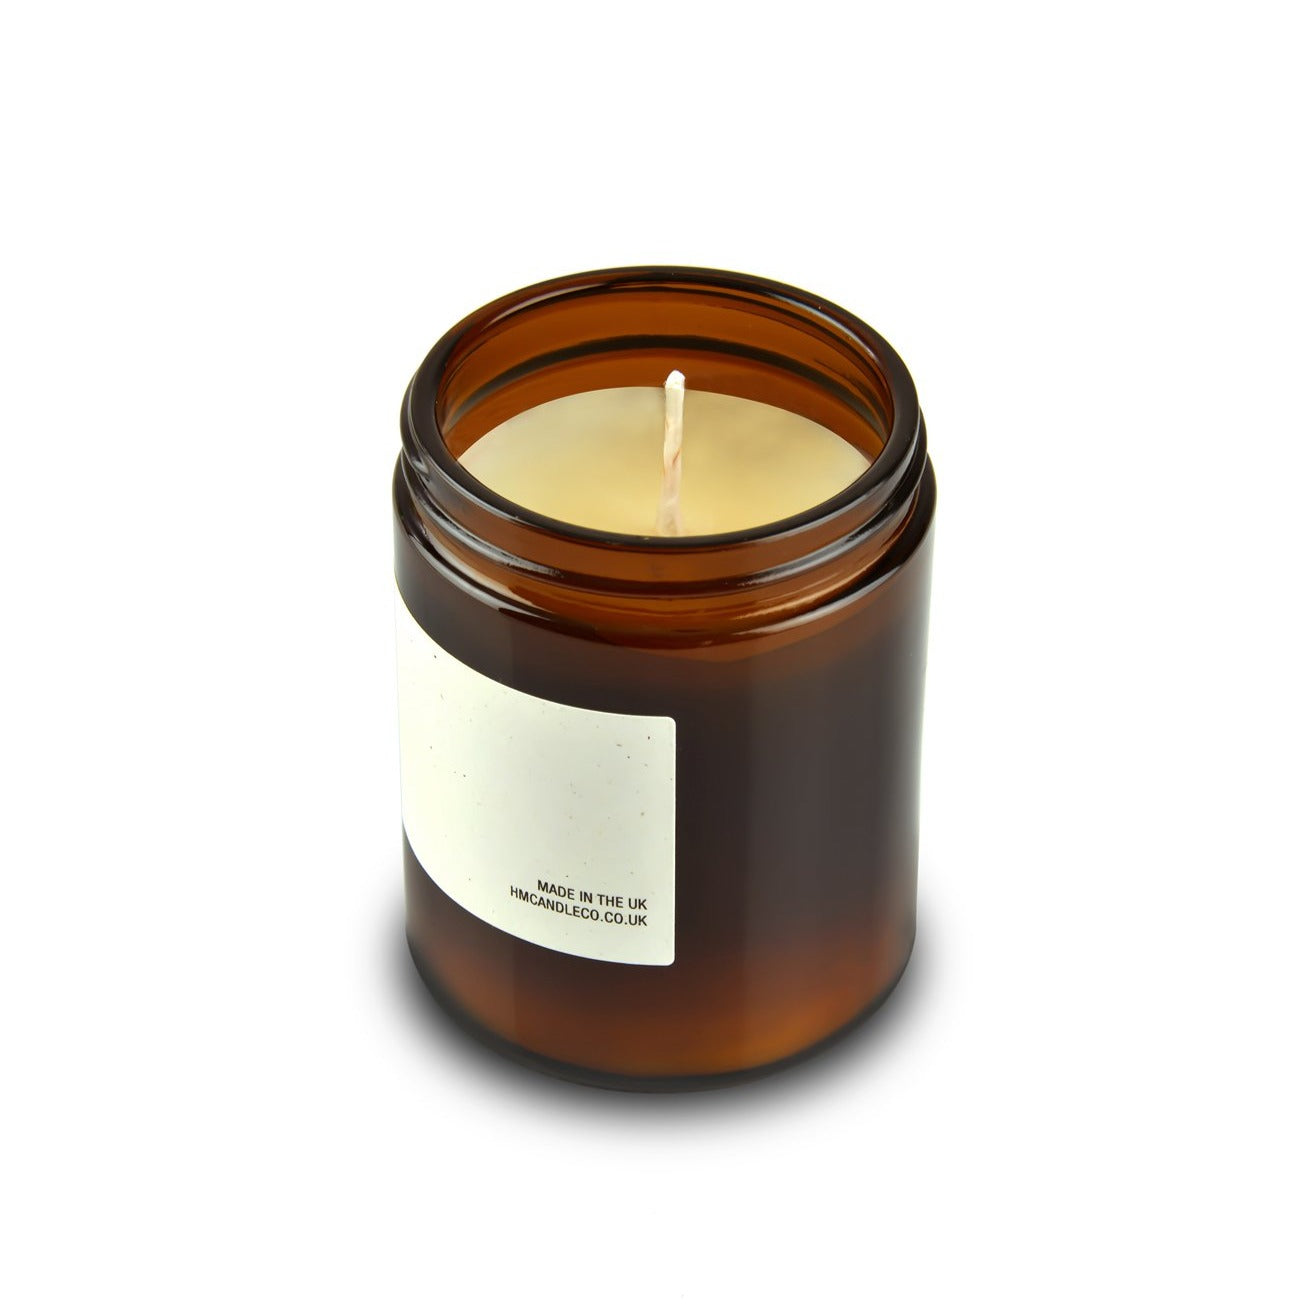 Tobacco & Sweet Hay Soy Wax Candle in a Recycled Amber Glass Pot